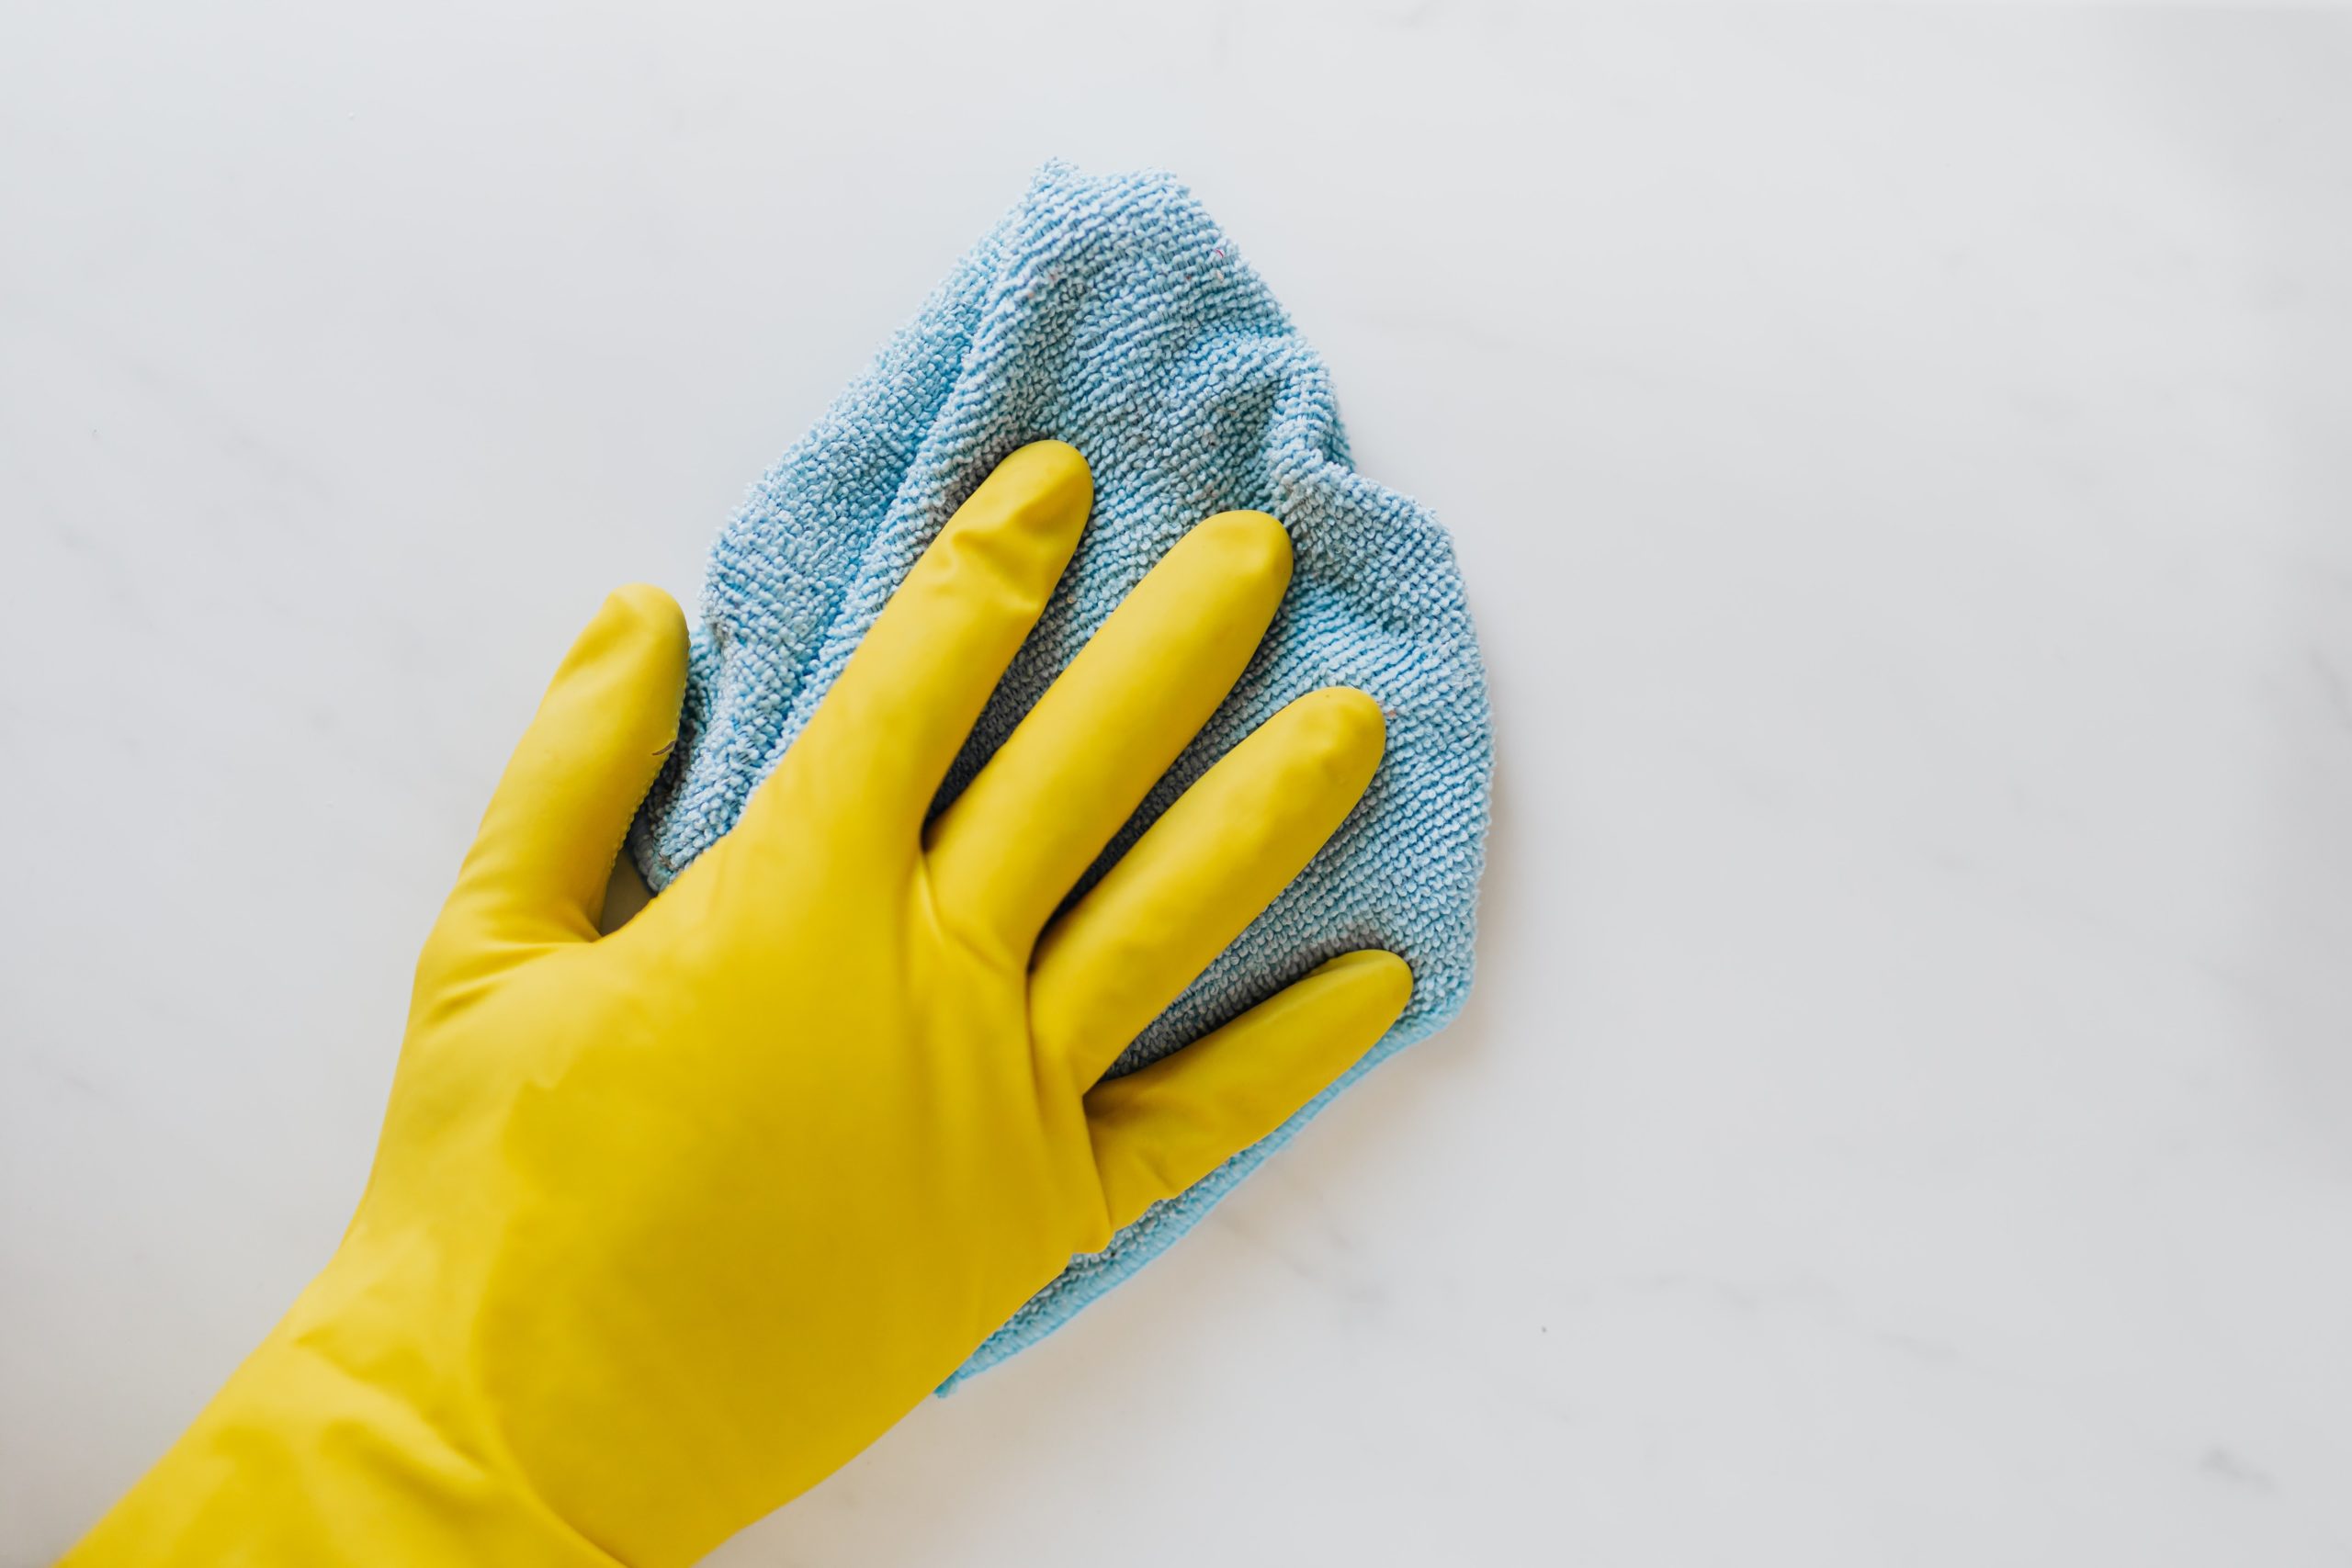 A yellow glove wiping with a blue rag.